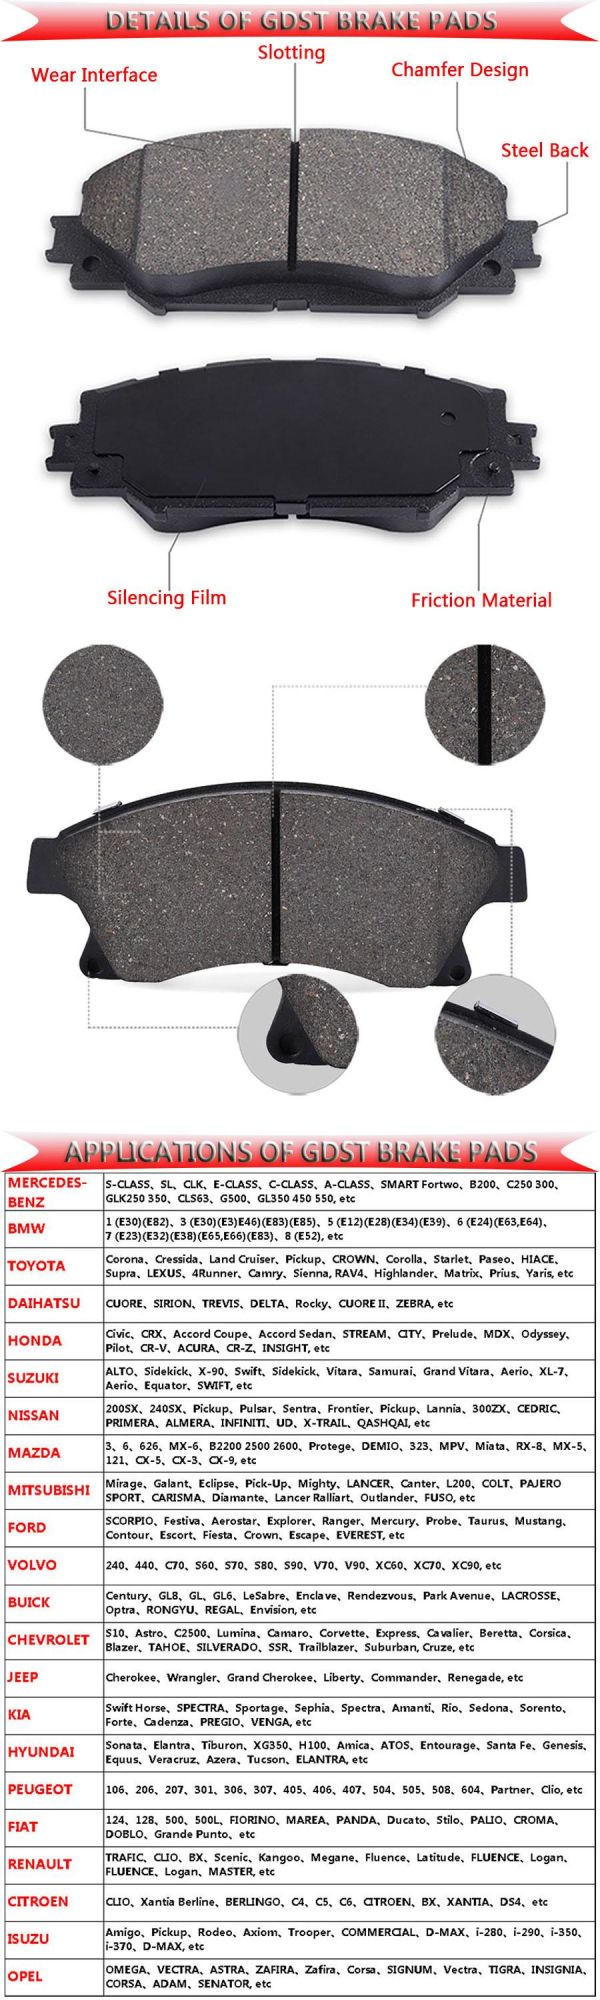 Gdst High Performance Rear Axle Brake Pad OEM D1872 000 420 59 00 for Mercedes Benz